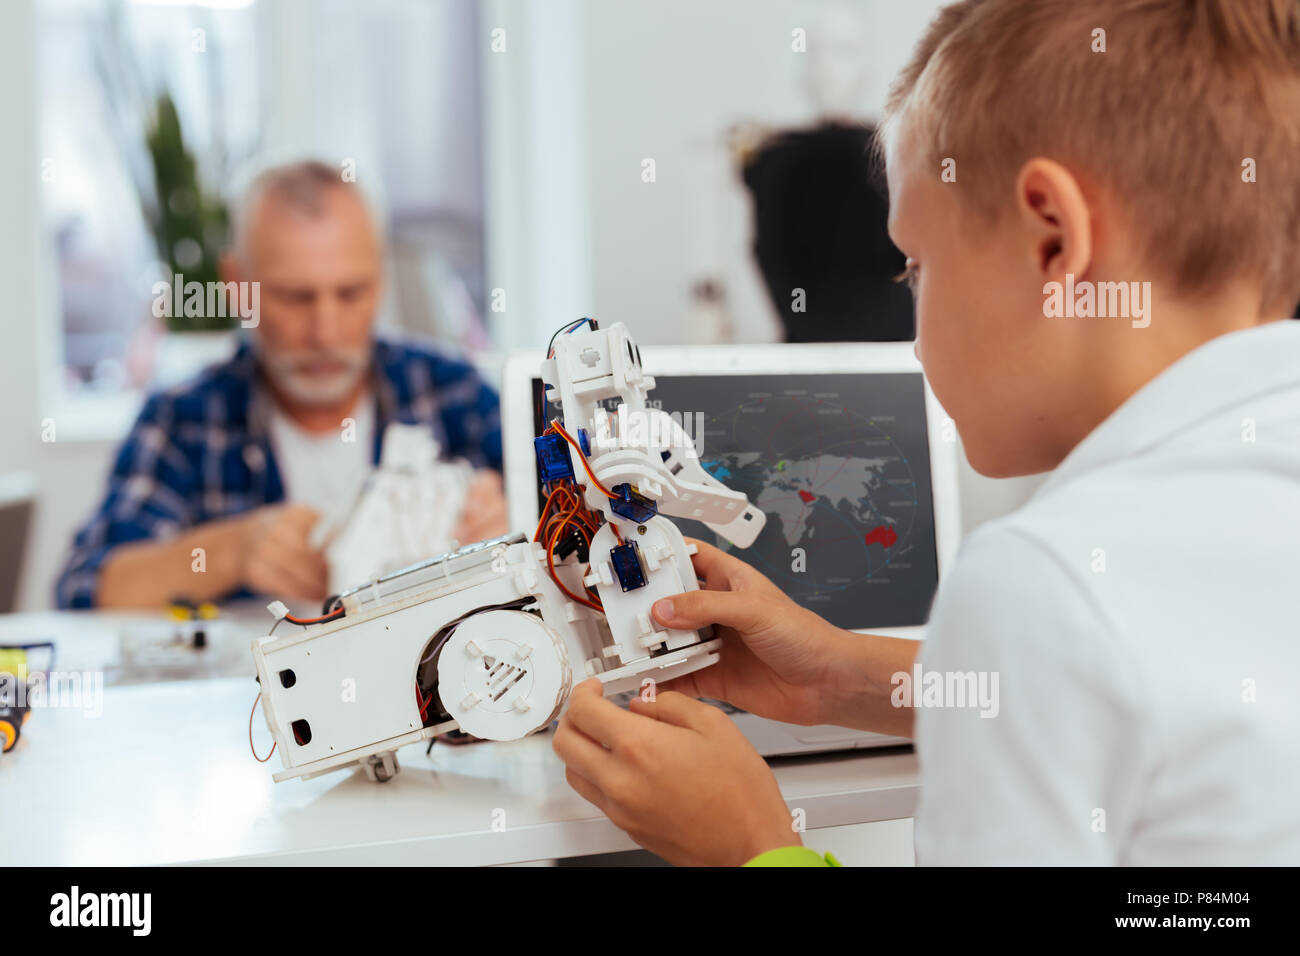 Nice pleasant boy holding a small robot in his hands Stock Photo